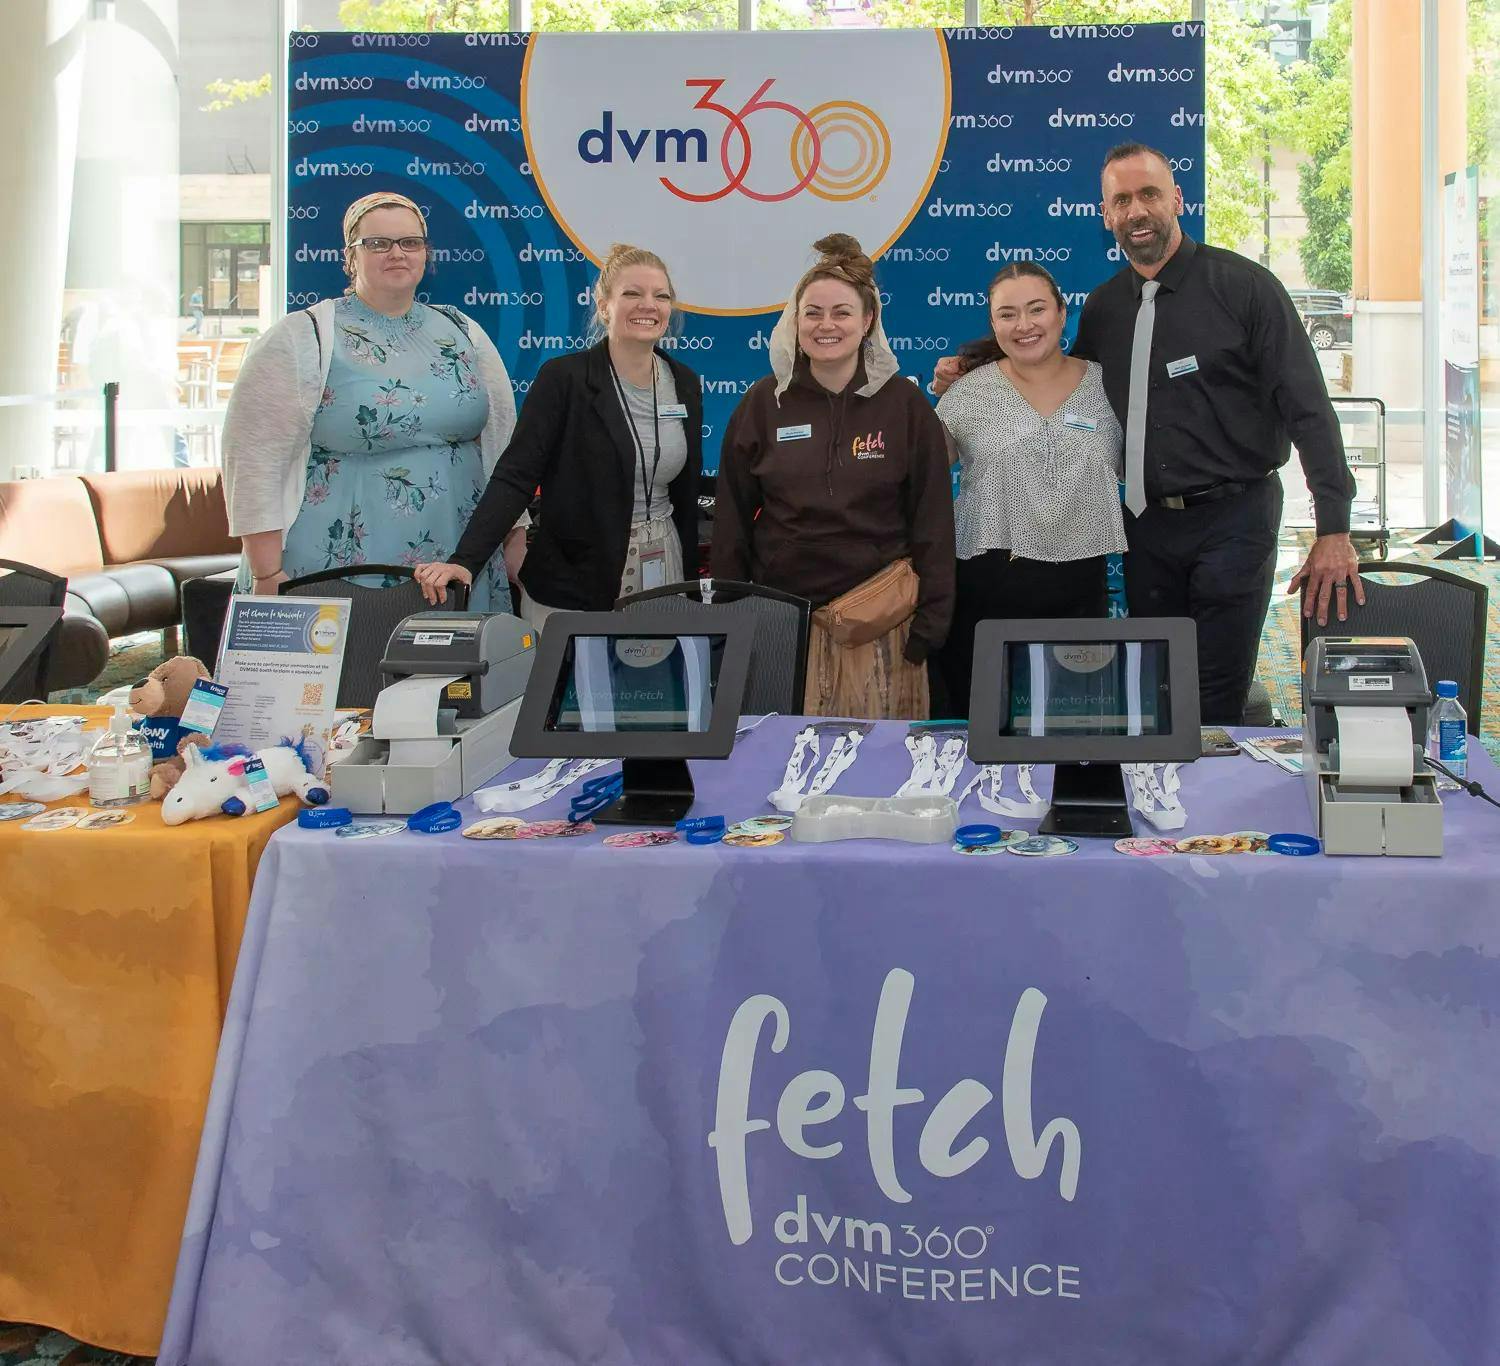 Sneak peek: dvm360 continues to roll out Fetch Nashville conference coverage, and other veterinary news 